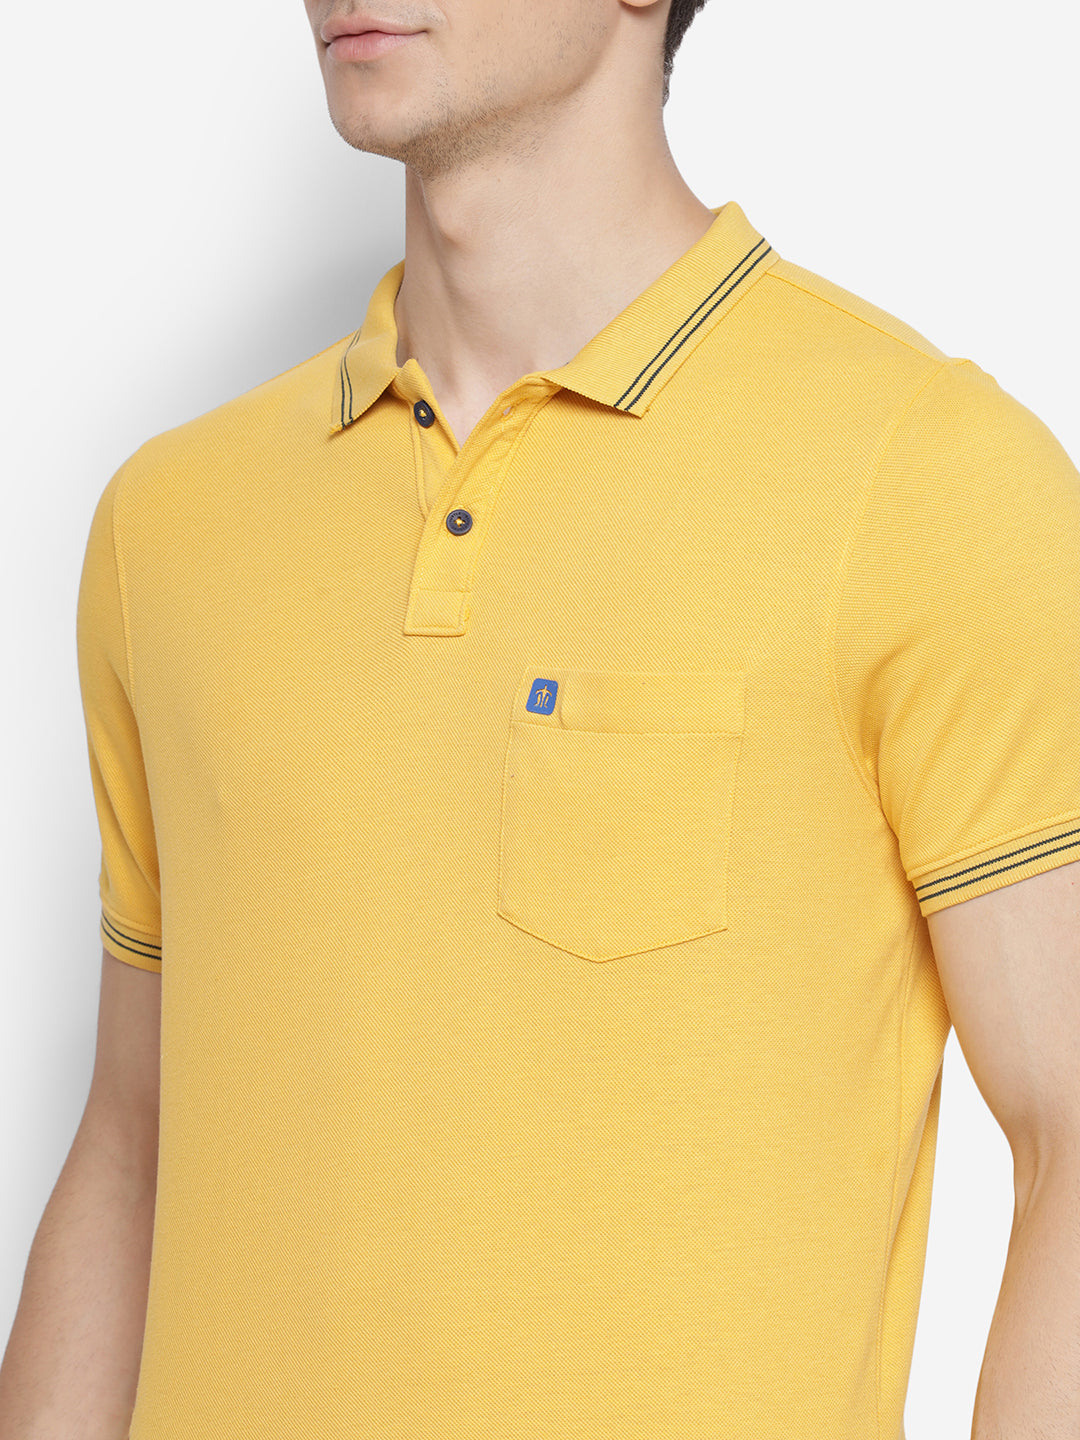 Essential Yellow & Blue Pique Polo T-shirt For Men (Pack of 2)